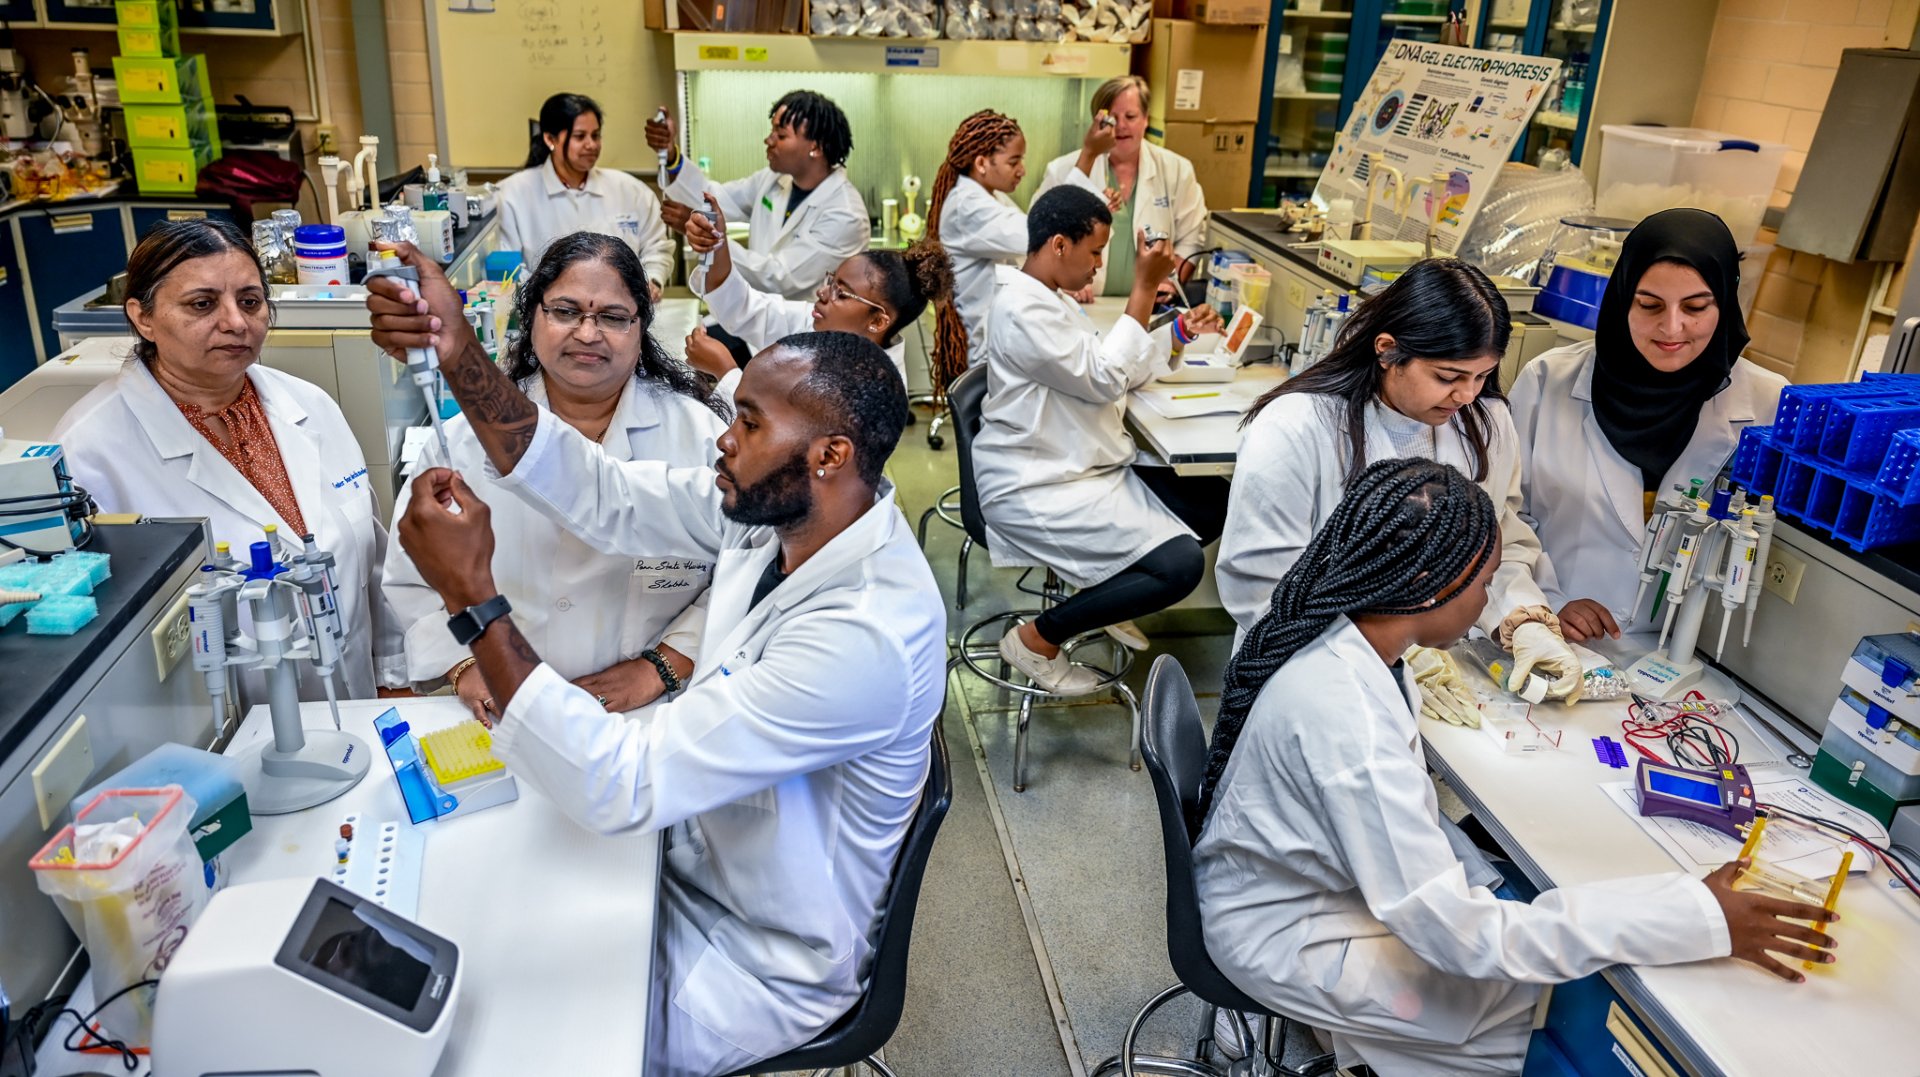 Students engaged in a two-week boot camp and three-day workshop in the ACL Forensic Science, Genetics and Toxicology laboratories on FVSU’s campus.